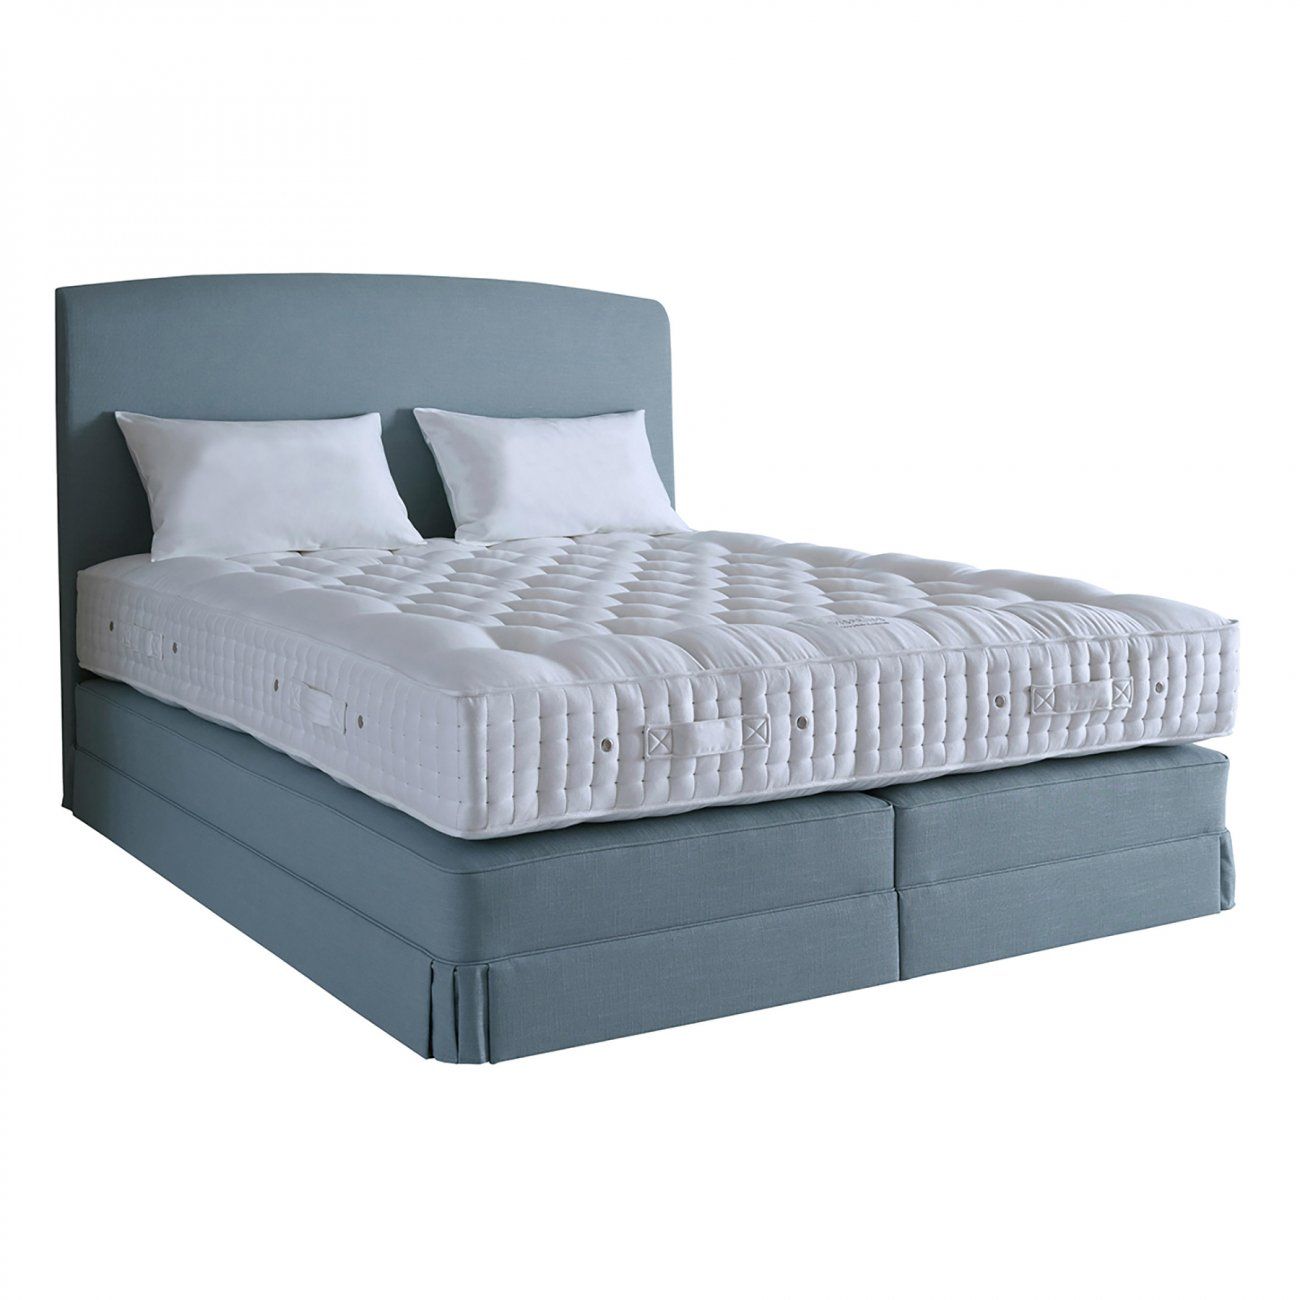 Double bed 160x200 grey Signature